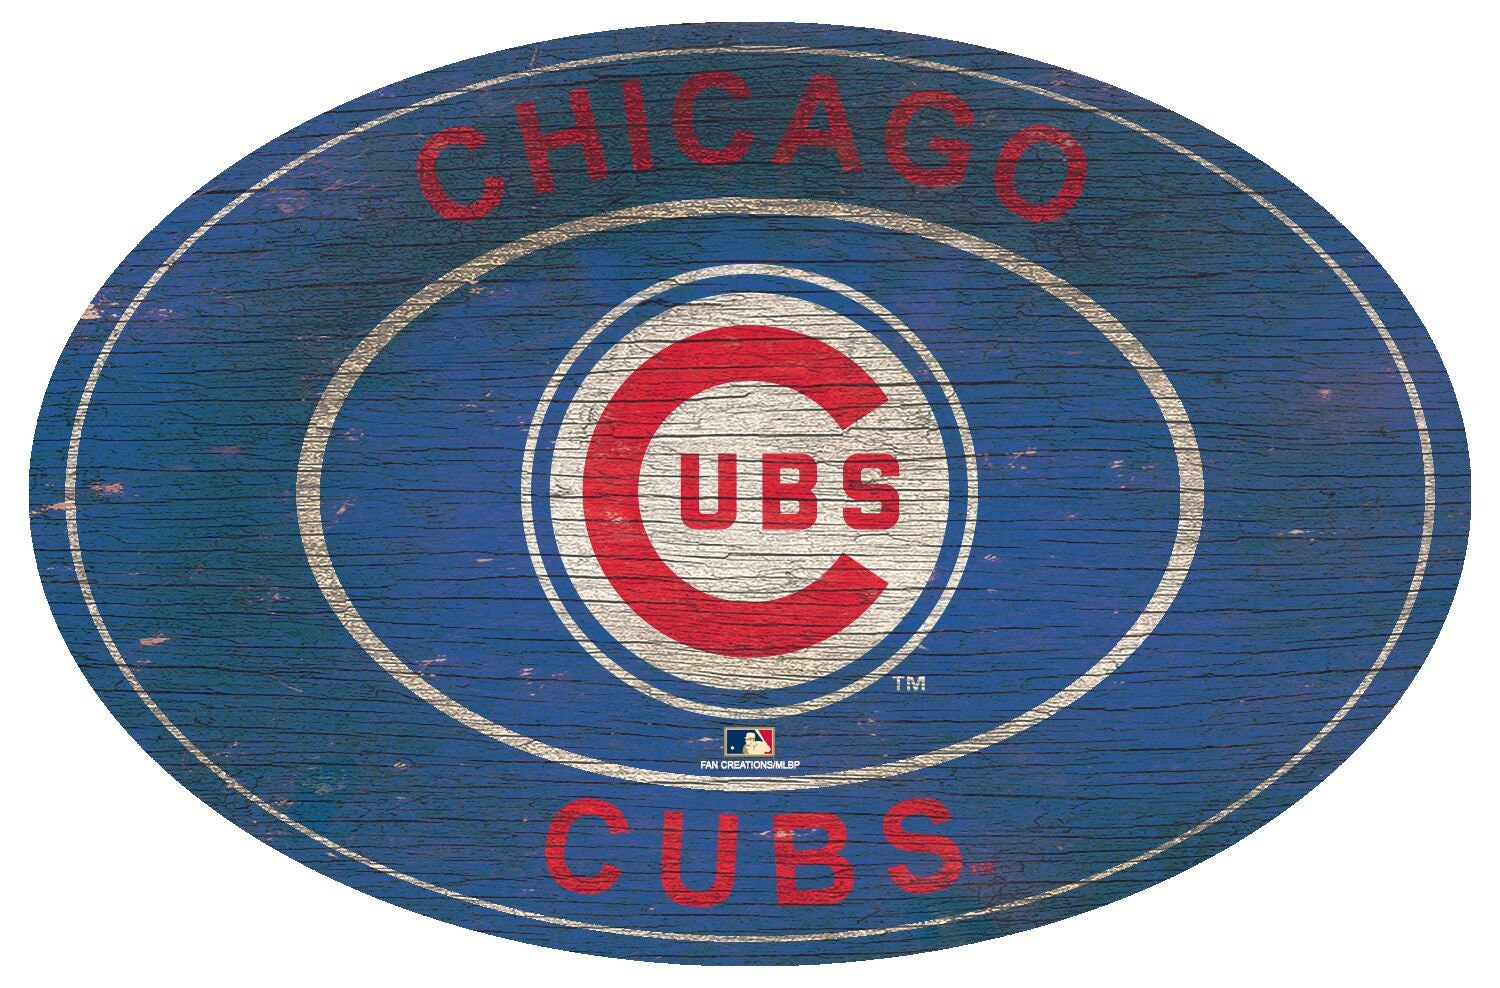 Chicago Cubs Wall Art - wide 8